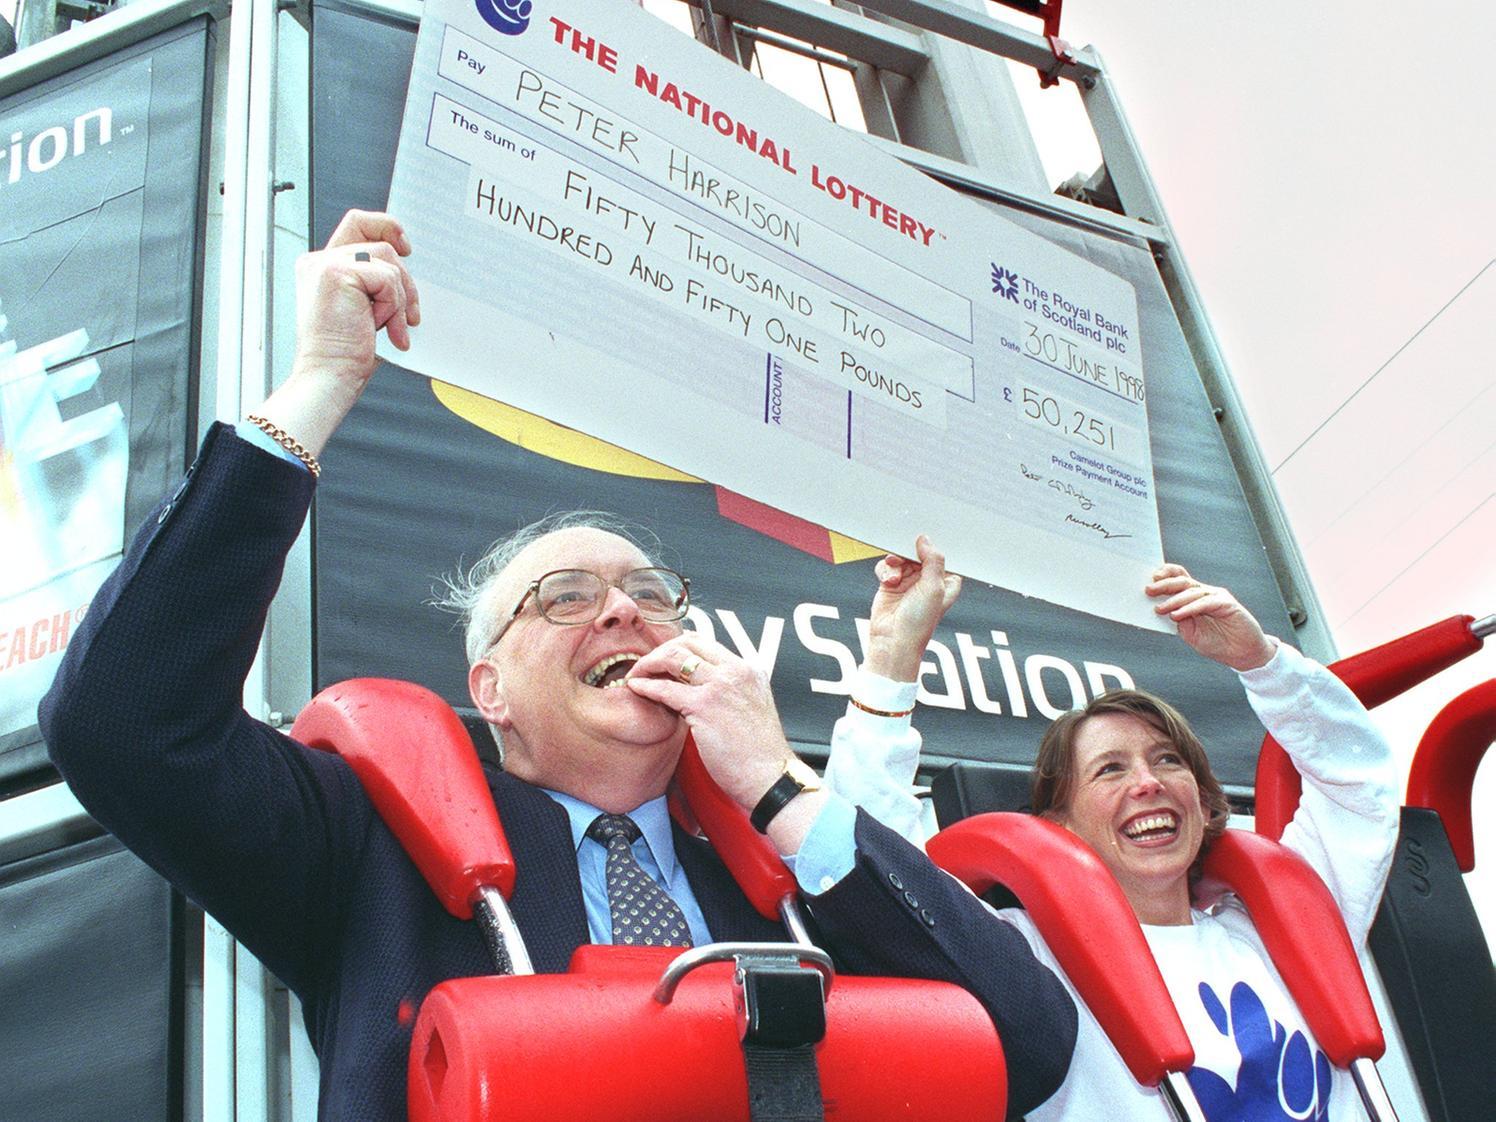 Elsewhere, Peter Harrison celebrated a 50,251 lottery win with a ride on the Sony PlayStation at Blackpool Pleasure Beach in 1998